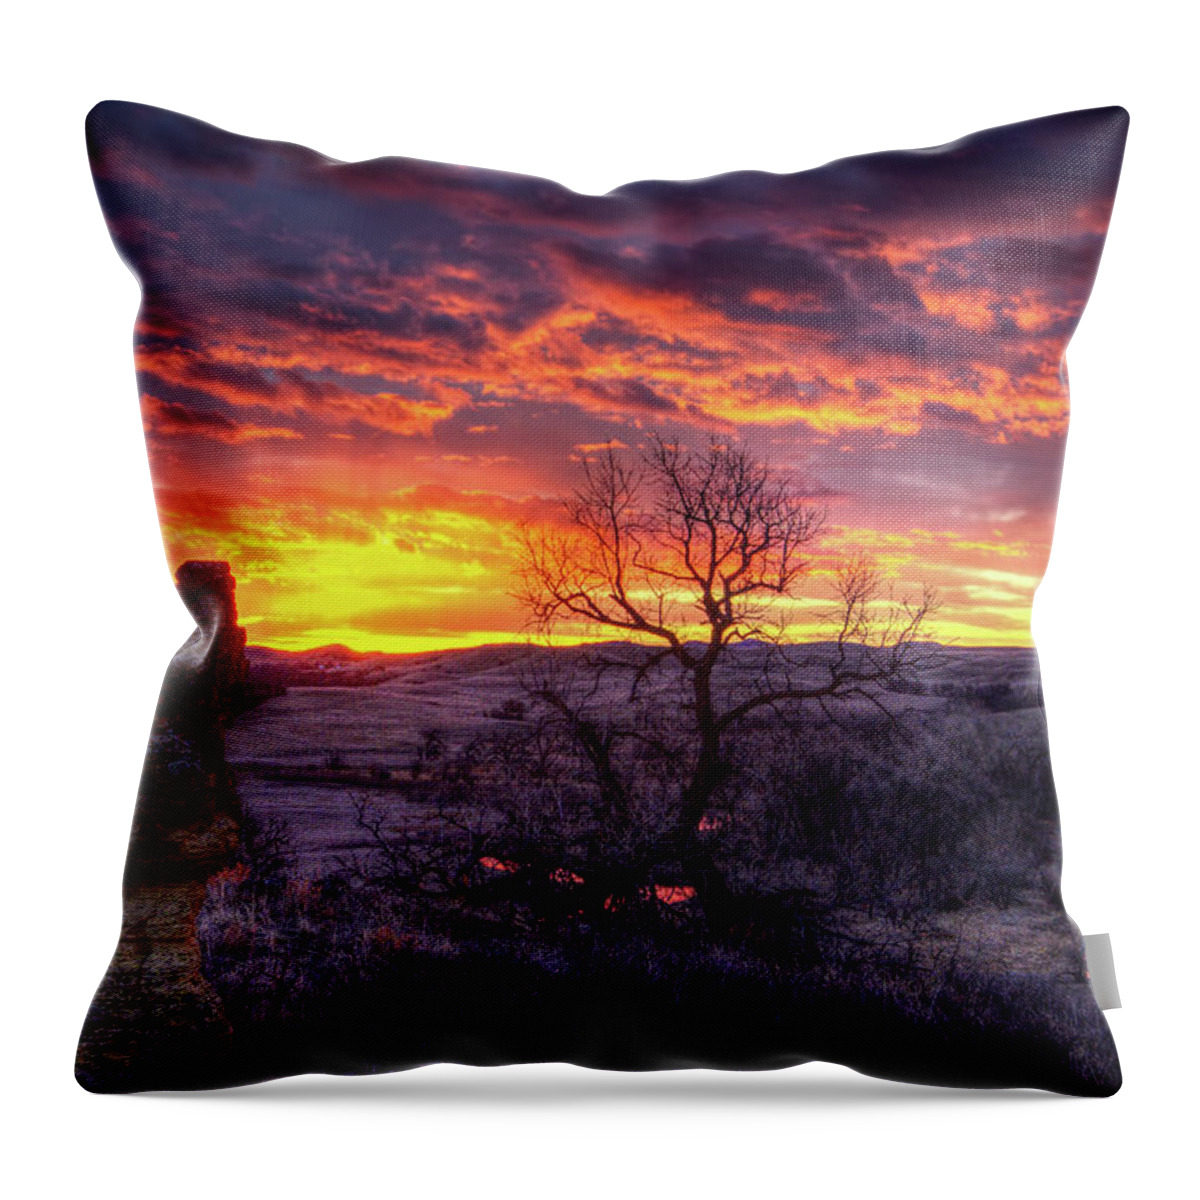 Redwater Throw Pillow featuring the photograph The Redwater by Fiskr Larsen